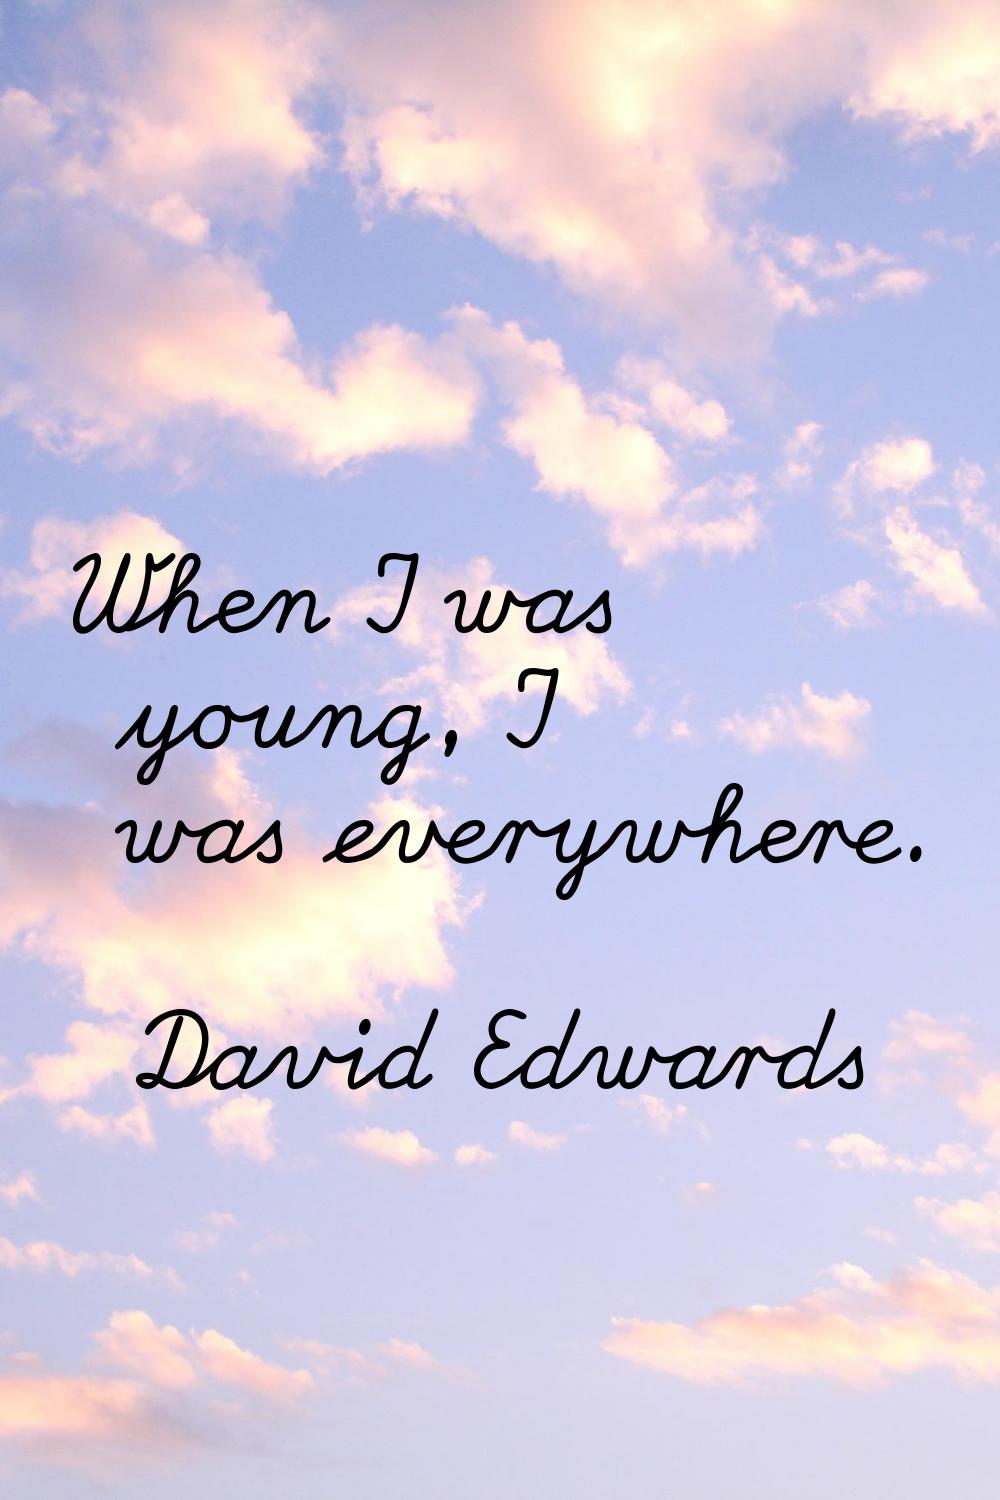 When I was young, I was everywhere.